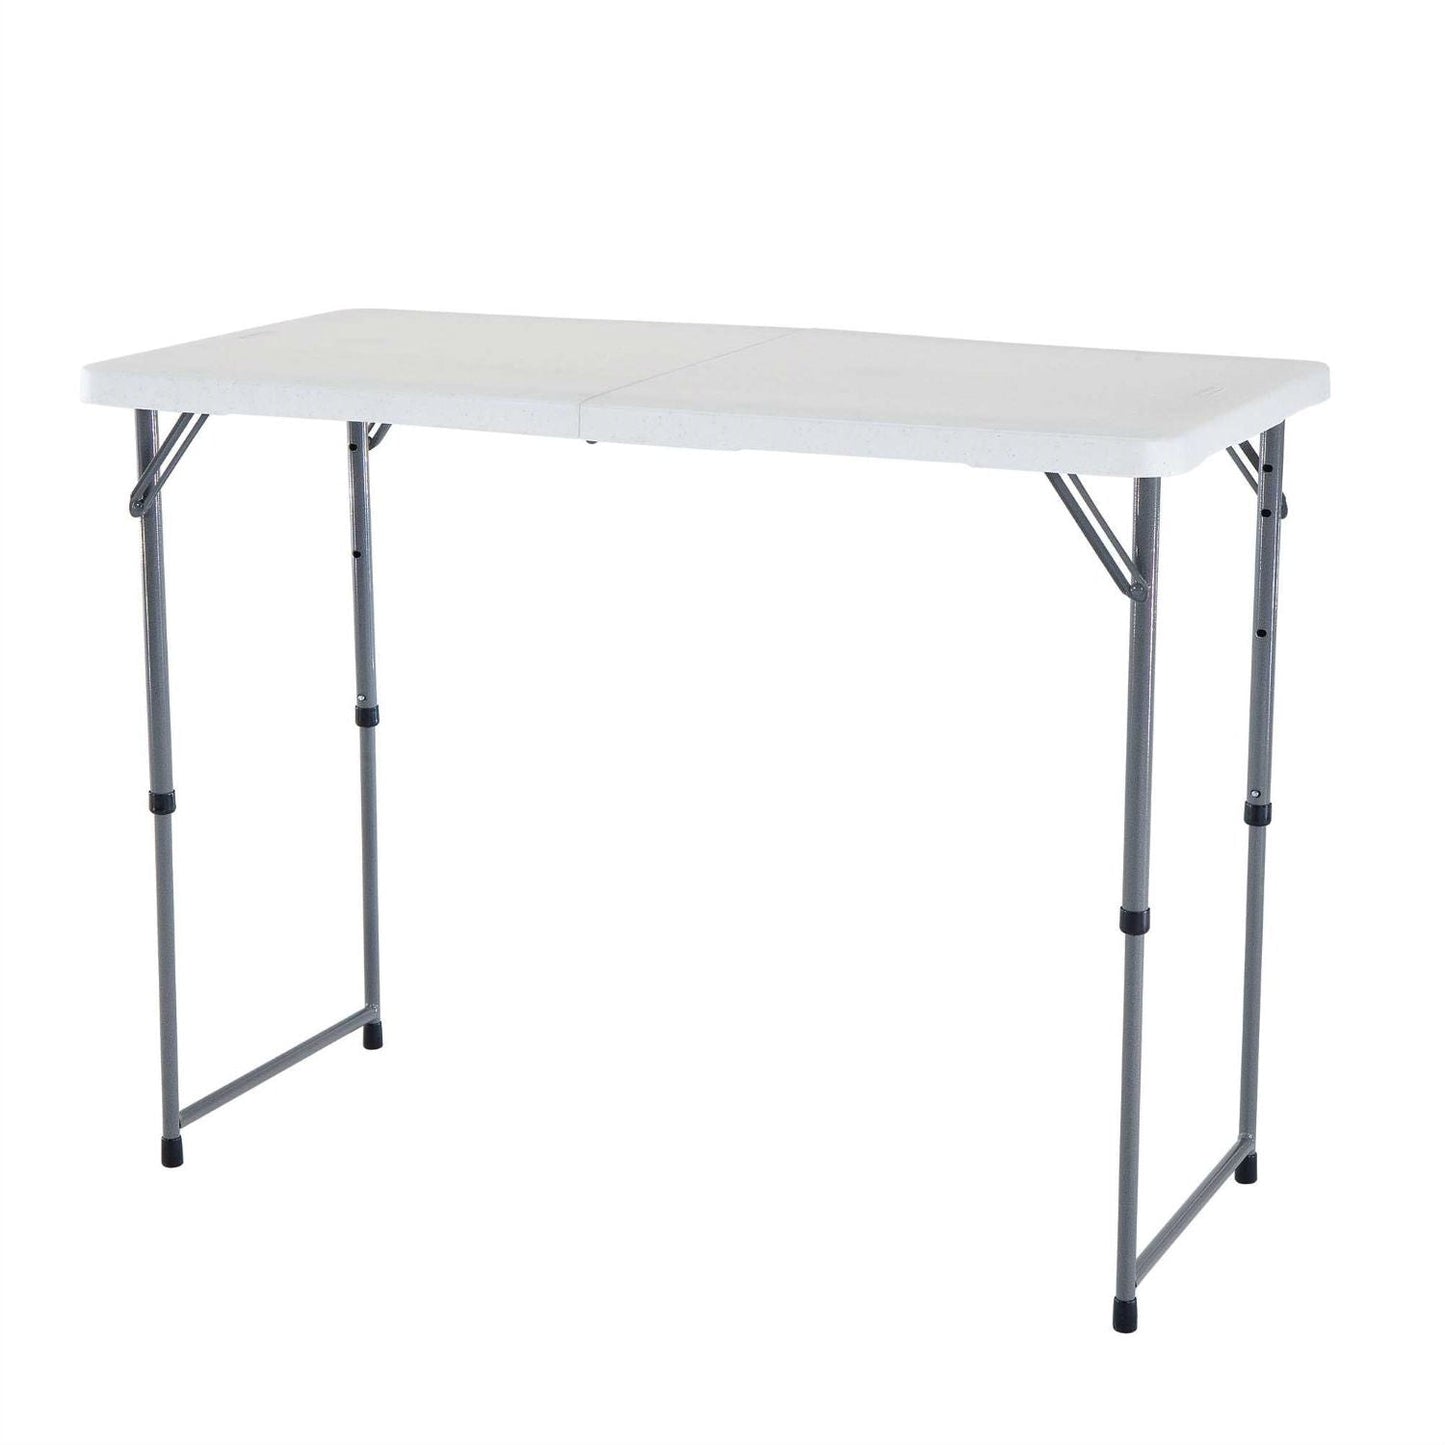 Office > Folding Tables - Adjustable Height White HDPE Folding Table With Powder Coated Steel Frame